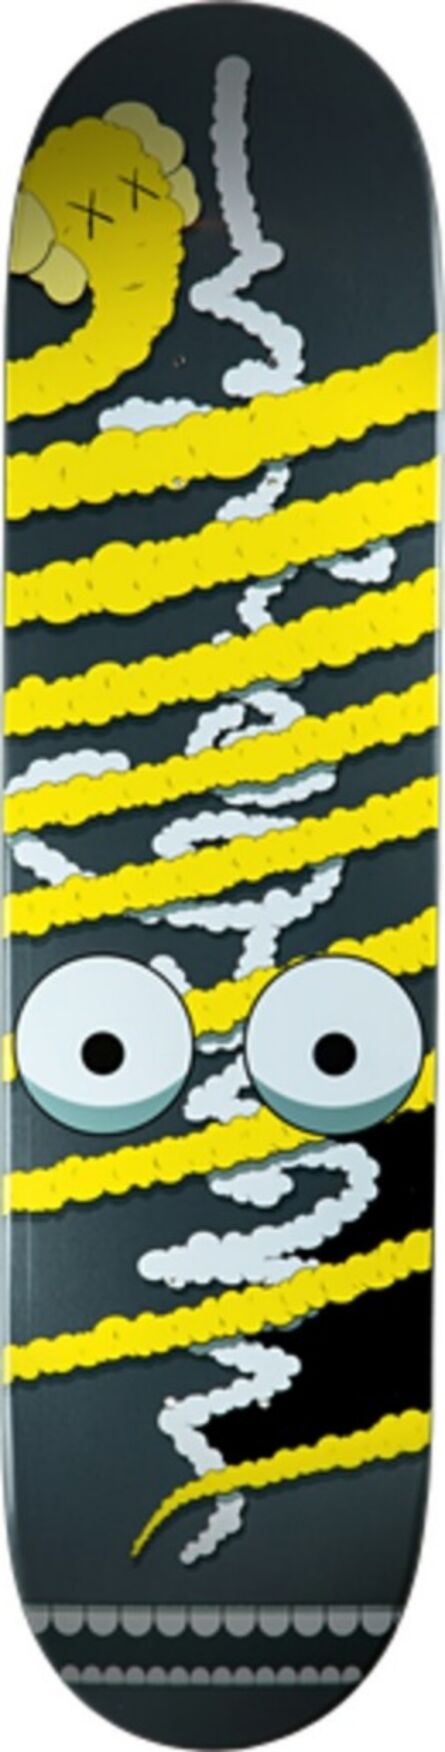 KAWS, ‘Yellow Snake (Limited Edition, Numbered) Skate Deck’, ca. 2005